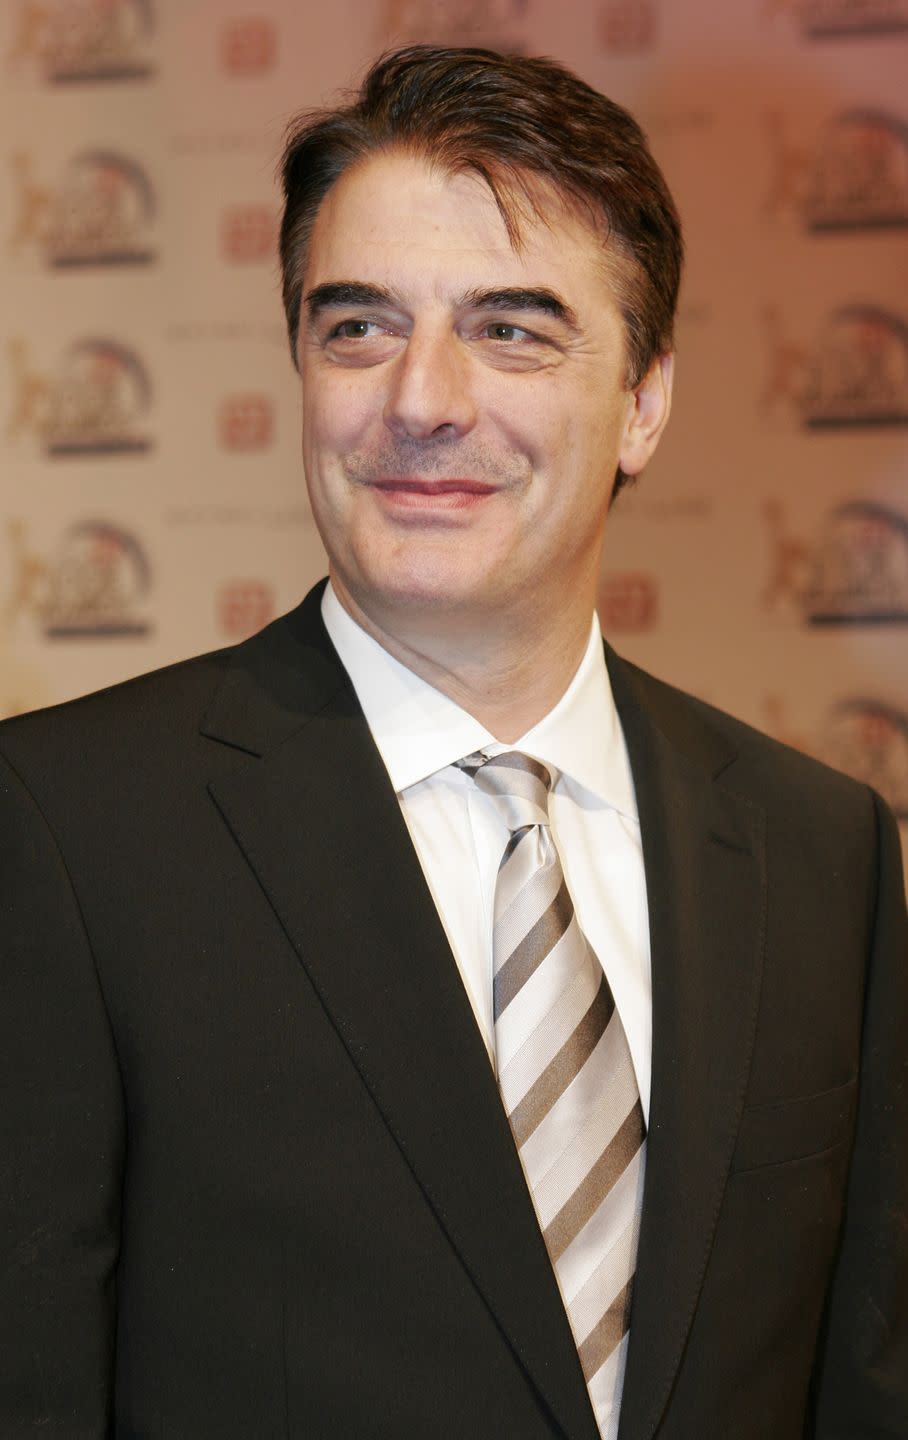 Then: Chris Noth